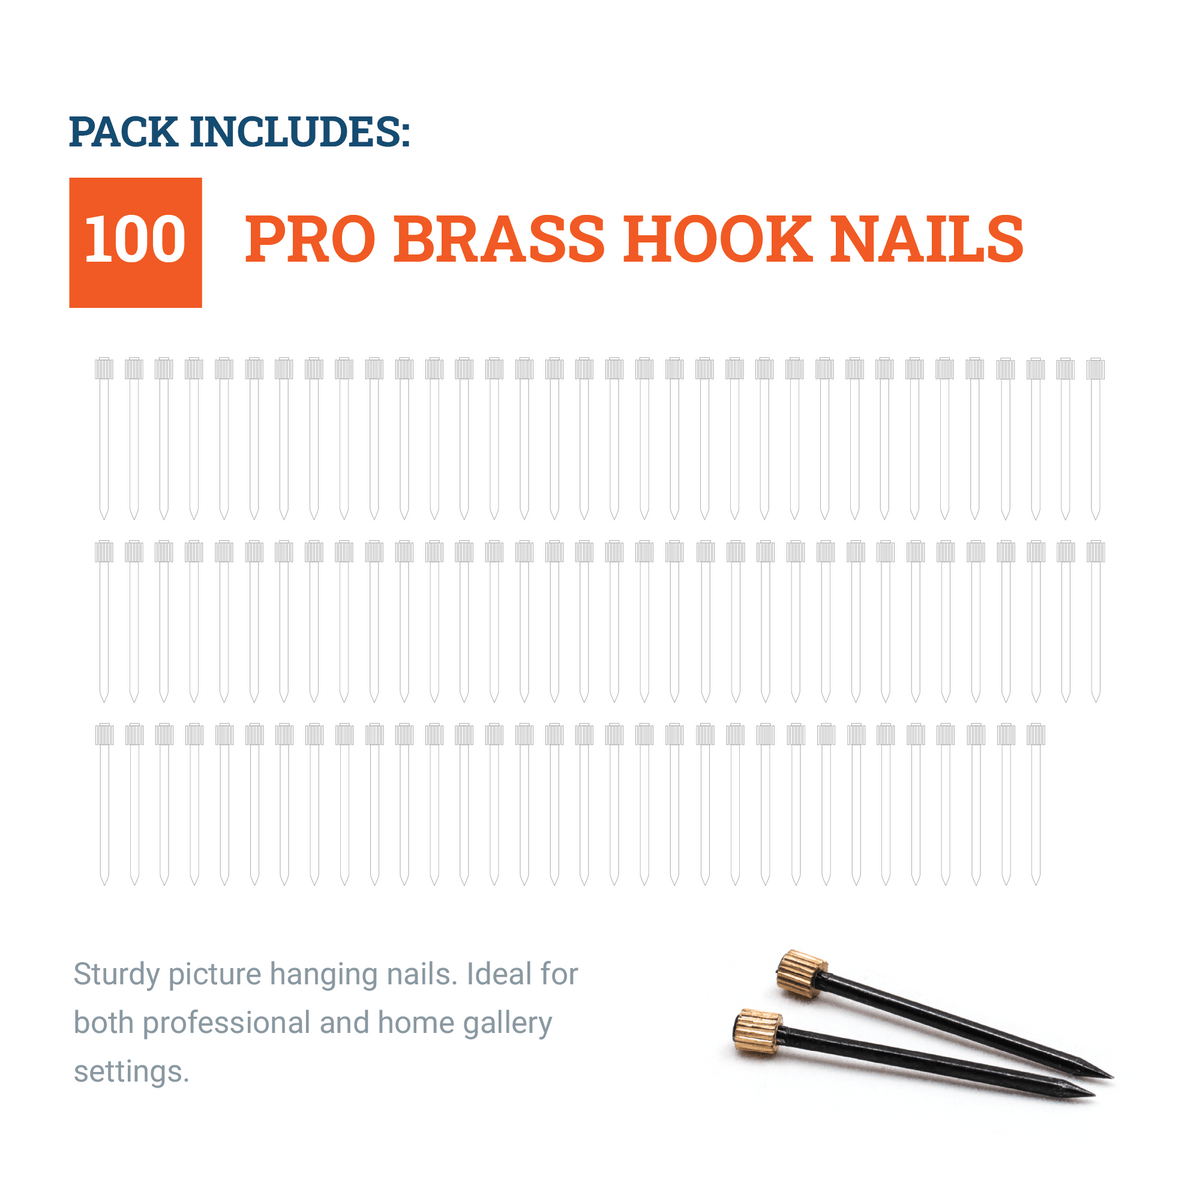 Brass Hook Nails Old Style - 100 Pack - HWR-2332-NLS - Picture Hang Solutions